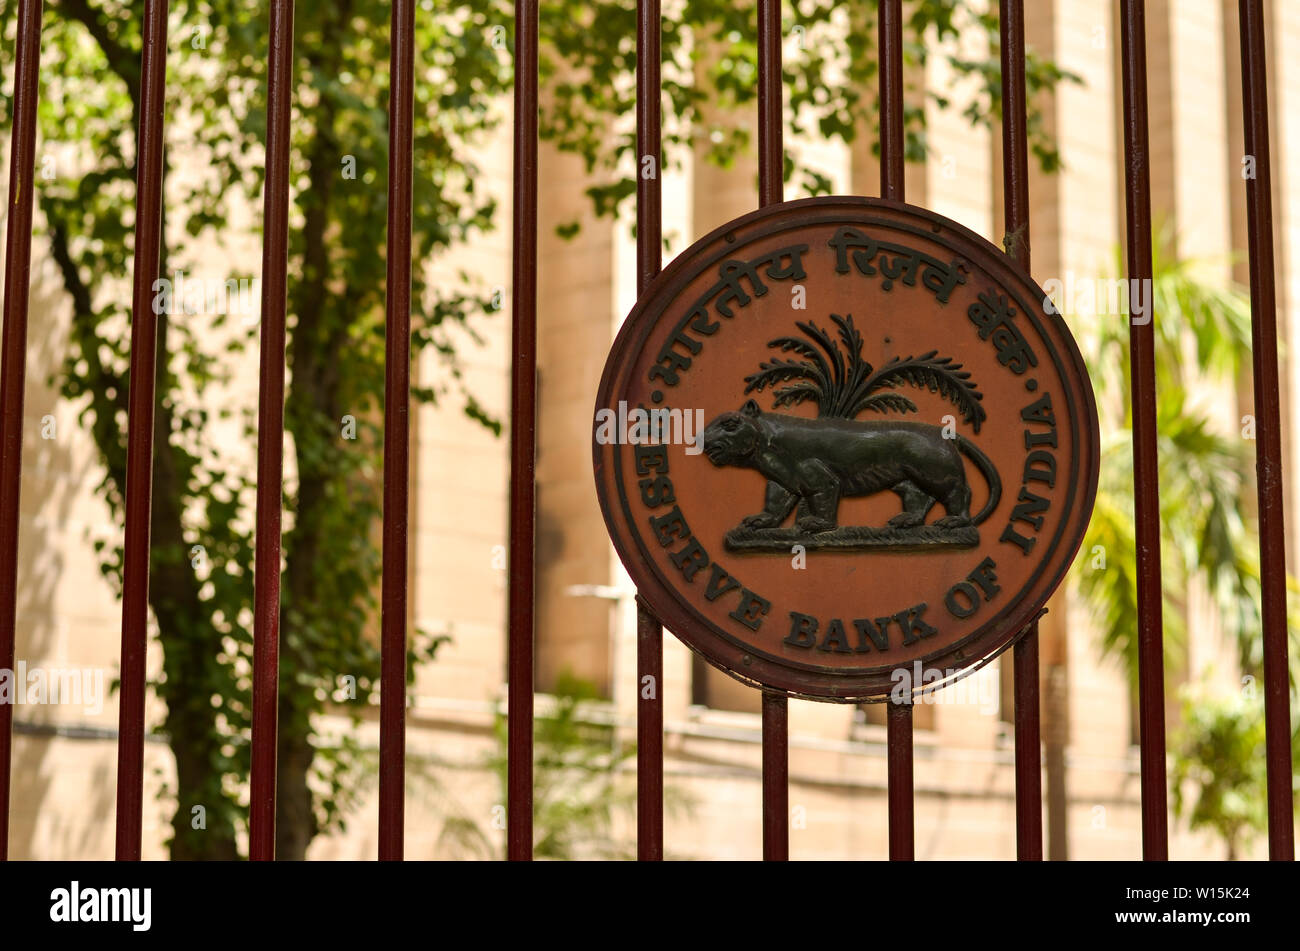 New Delhi, India, 2020. RBI logo on the closed iron gate of Reserve Bank of India (RBI) building at Patel Chowk, Connaught Place Stock Photo